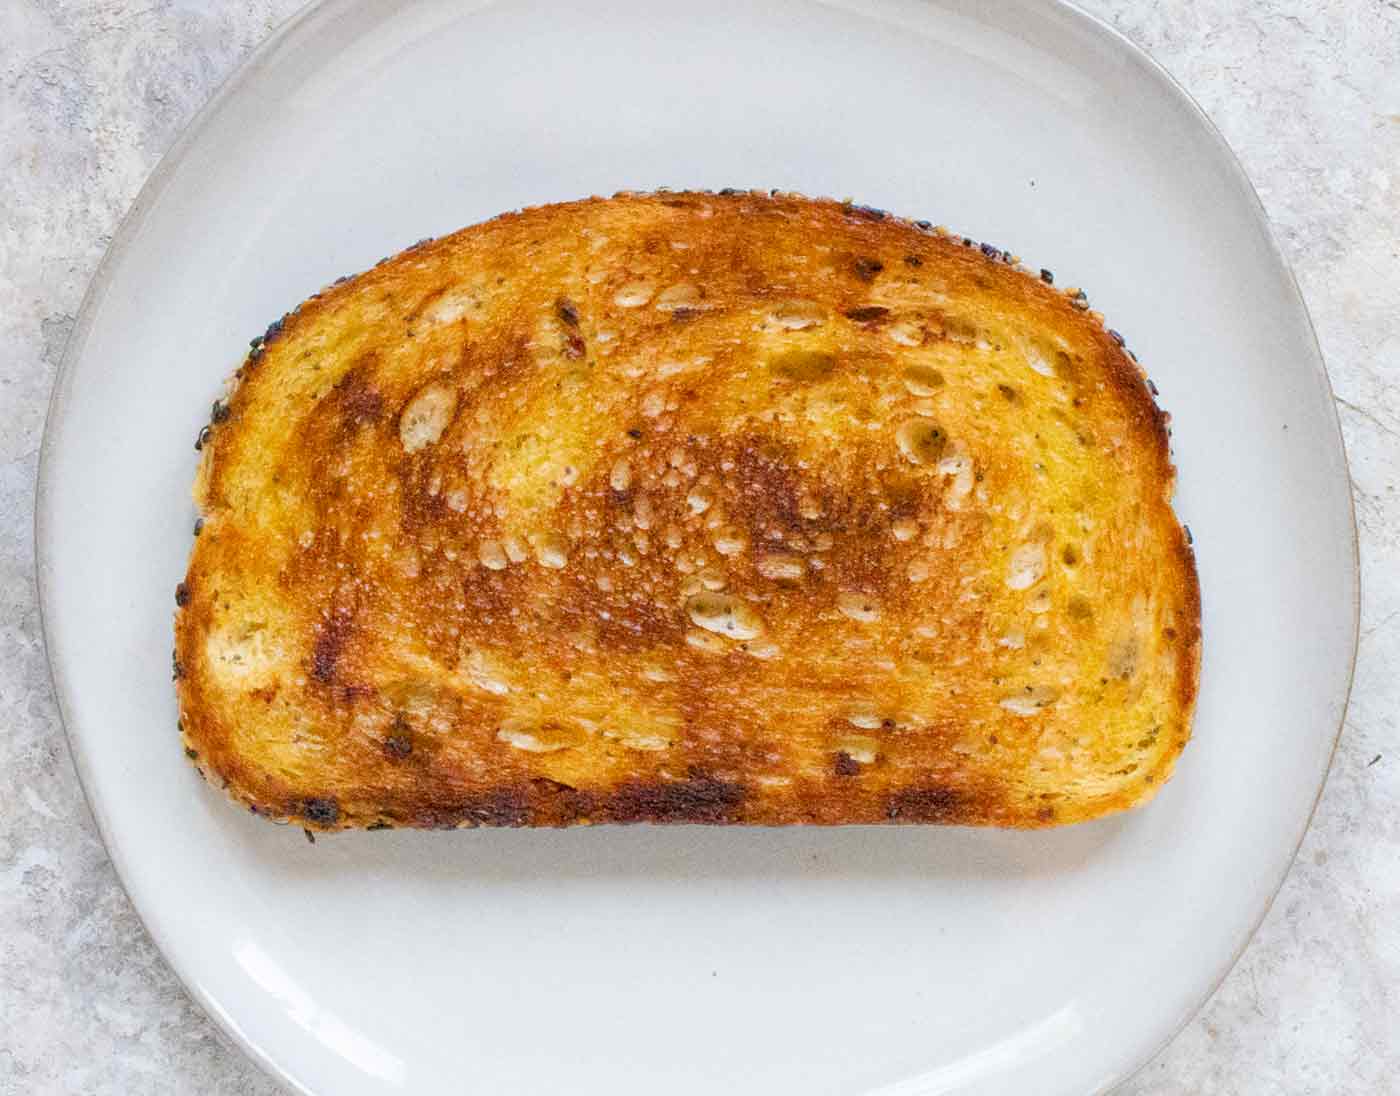 A slice of sourdough bread that's been fried until beautifully golden brown. It's sitting on a light gray plate, ready to enjoy.